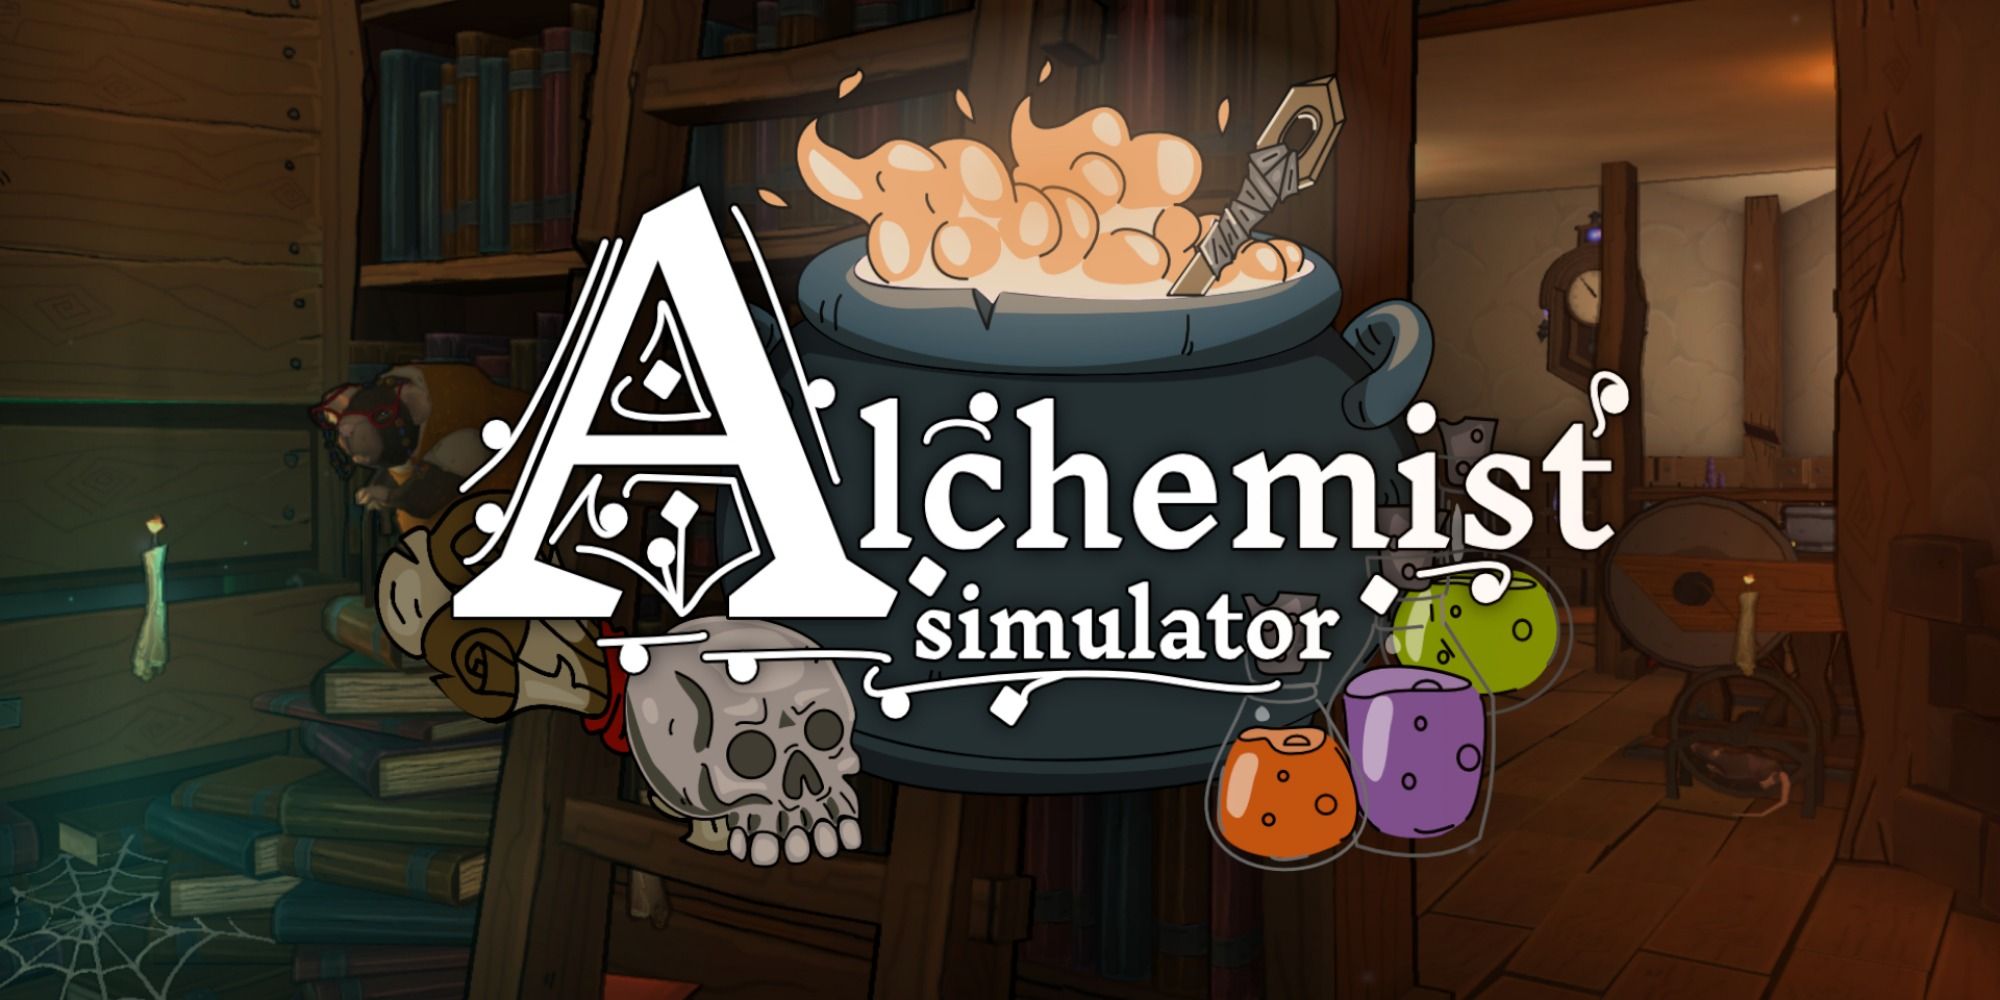 Alchemist Simulator title art inside a cozy medieval cottage with art of cauldron and potions